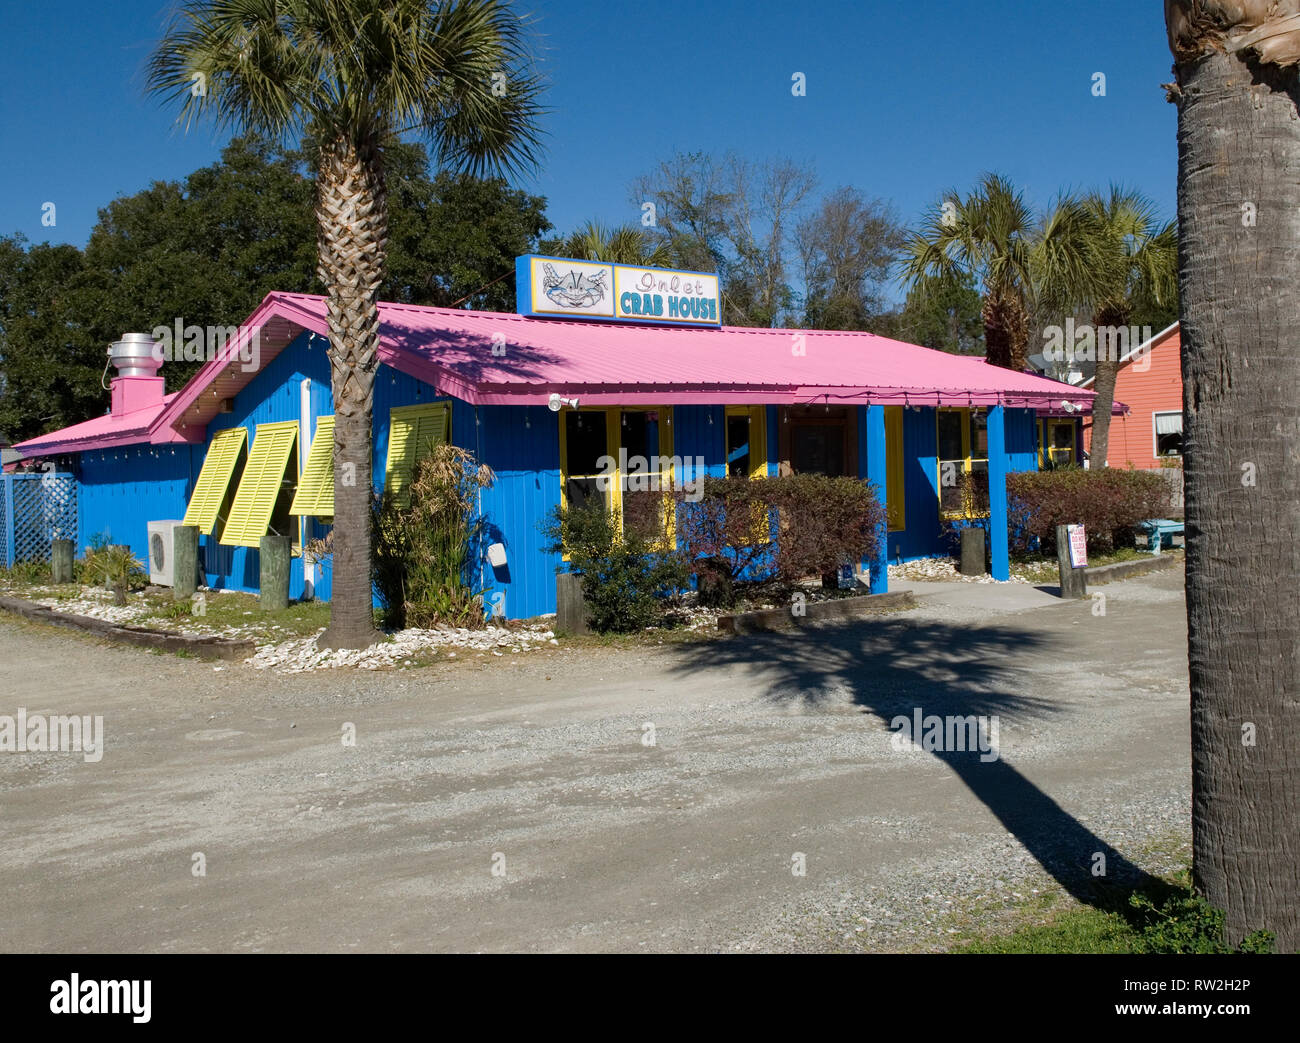 Captain Jimmy's Inlet Crab House Restaurant & Raw Bar in Murrells Inlet SC USA. Stockfoto